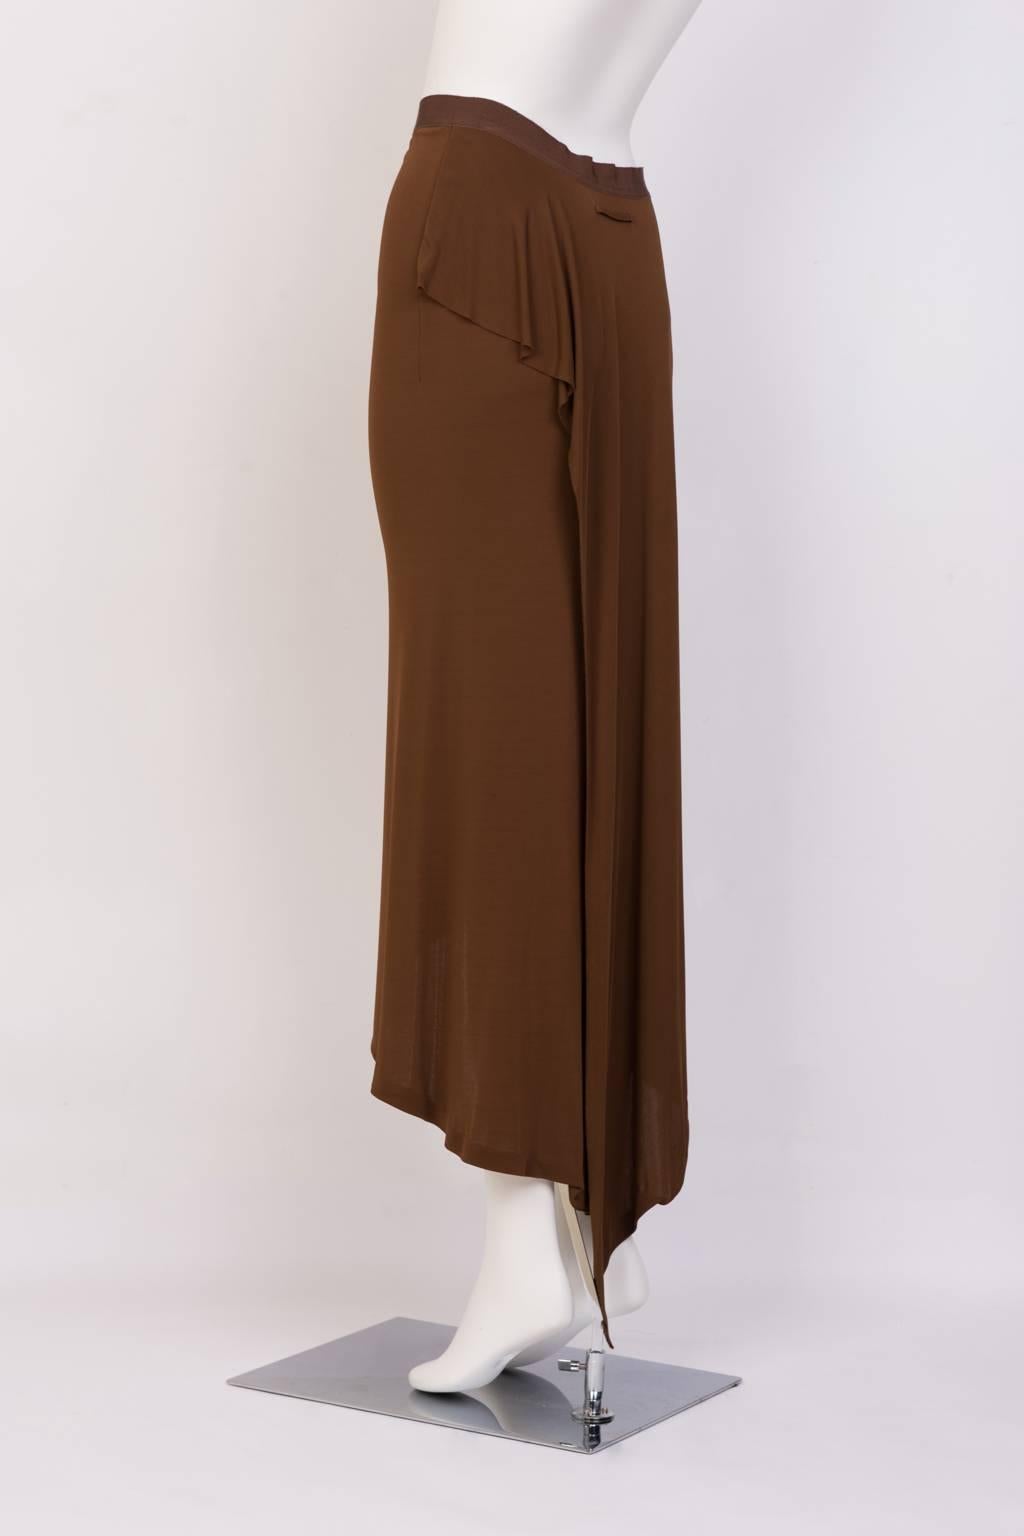 GAULTIER  FEMME Draped Crepe Skirt In Excellent Condition For Sale In Xiamen, Fujian